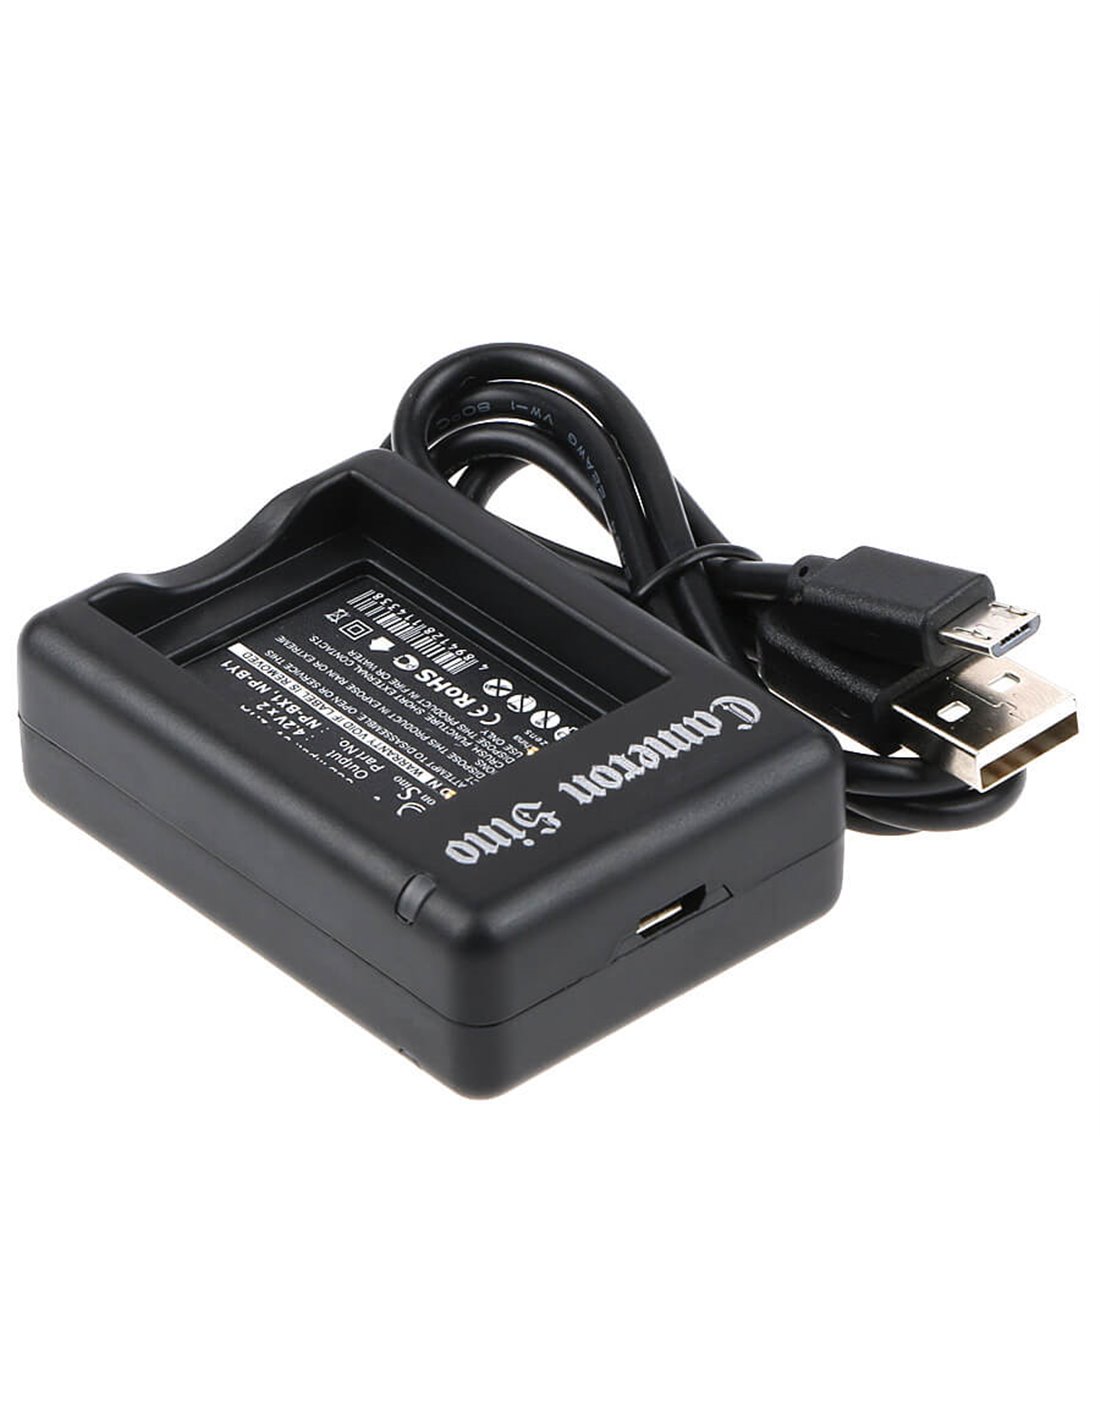 Sony Bc-csxb, Bc-dcy, Np-bx1 Camera Charger